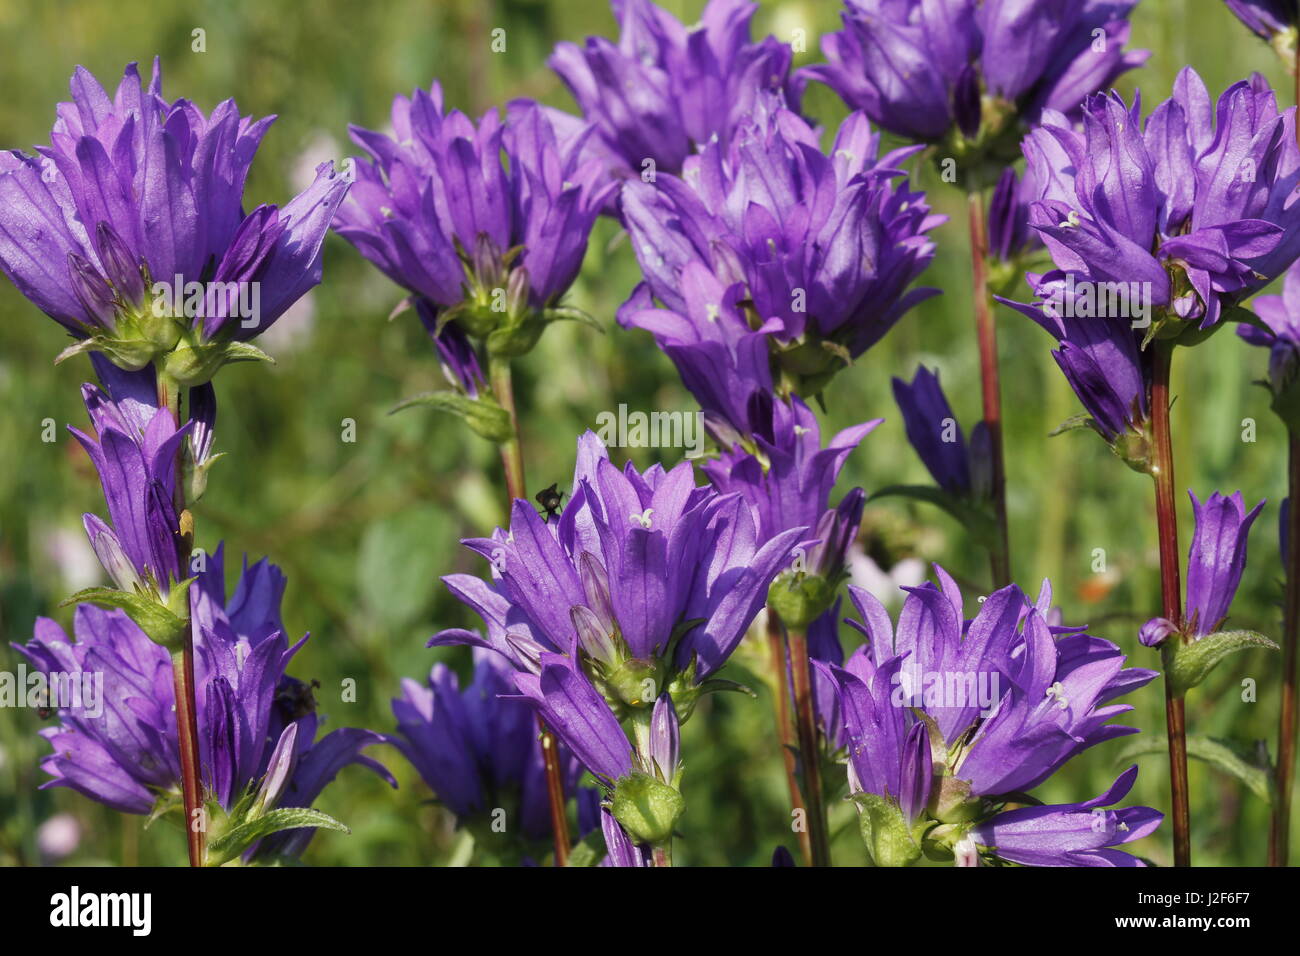 large group of the purple flowers of Clustered Bellflower Stock Photo